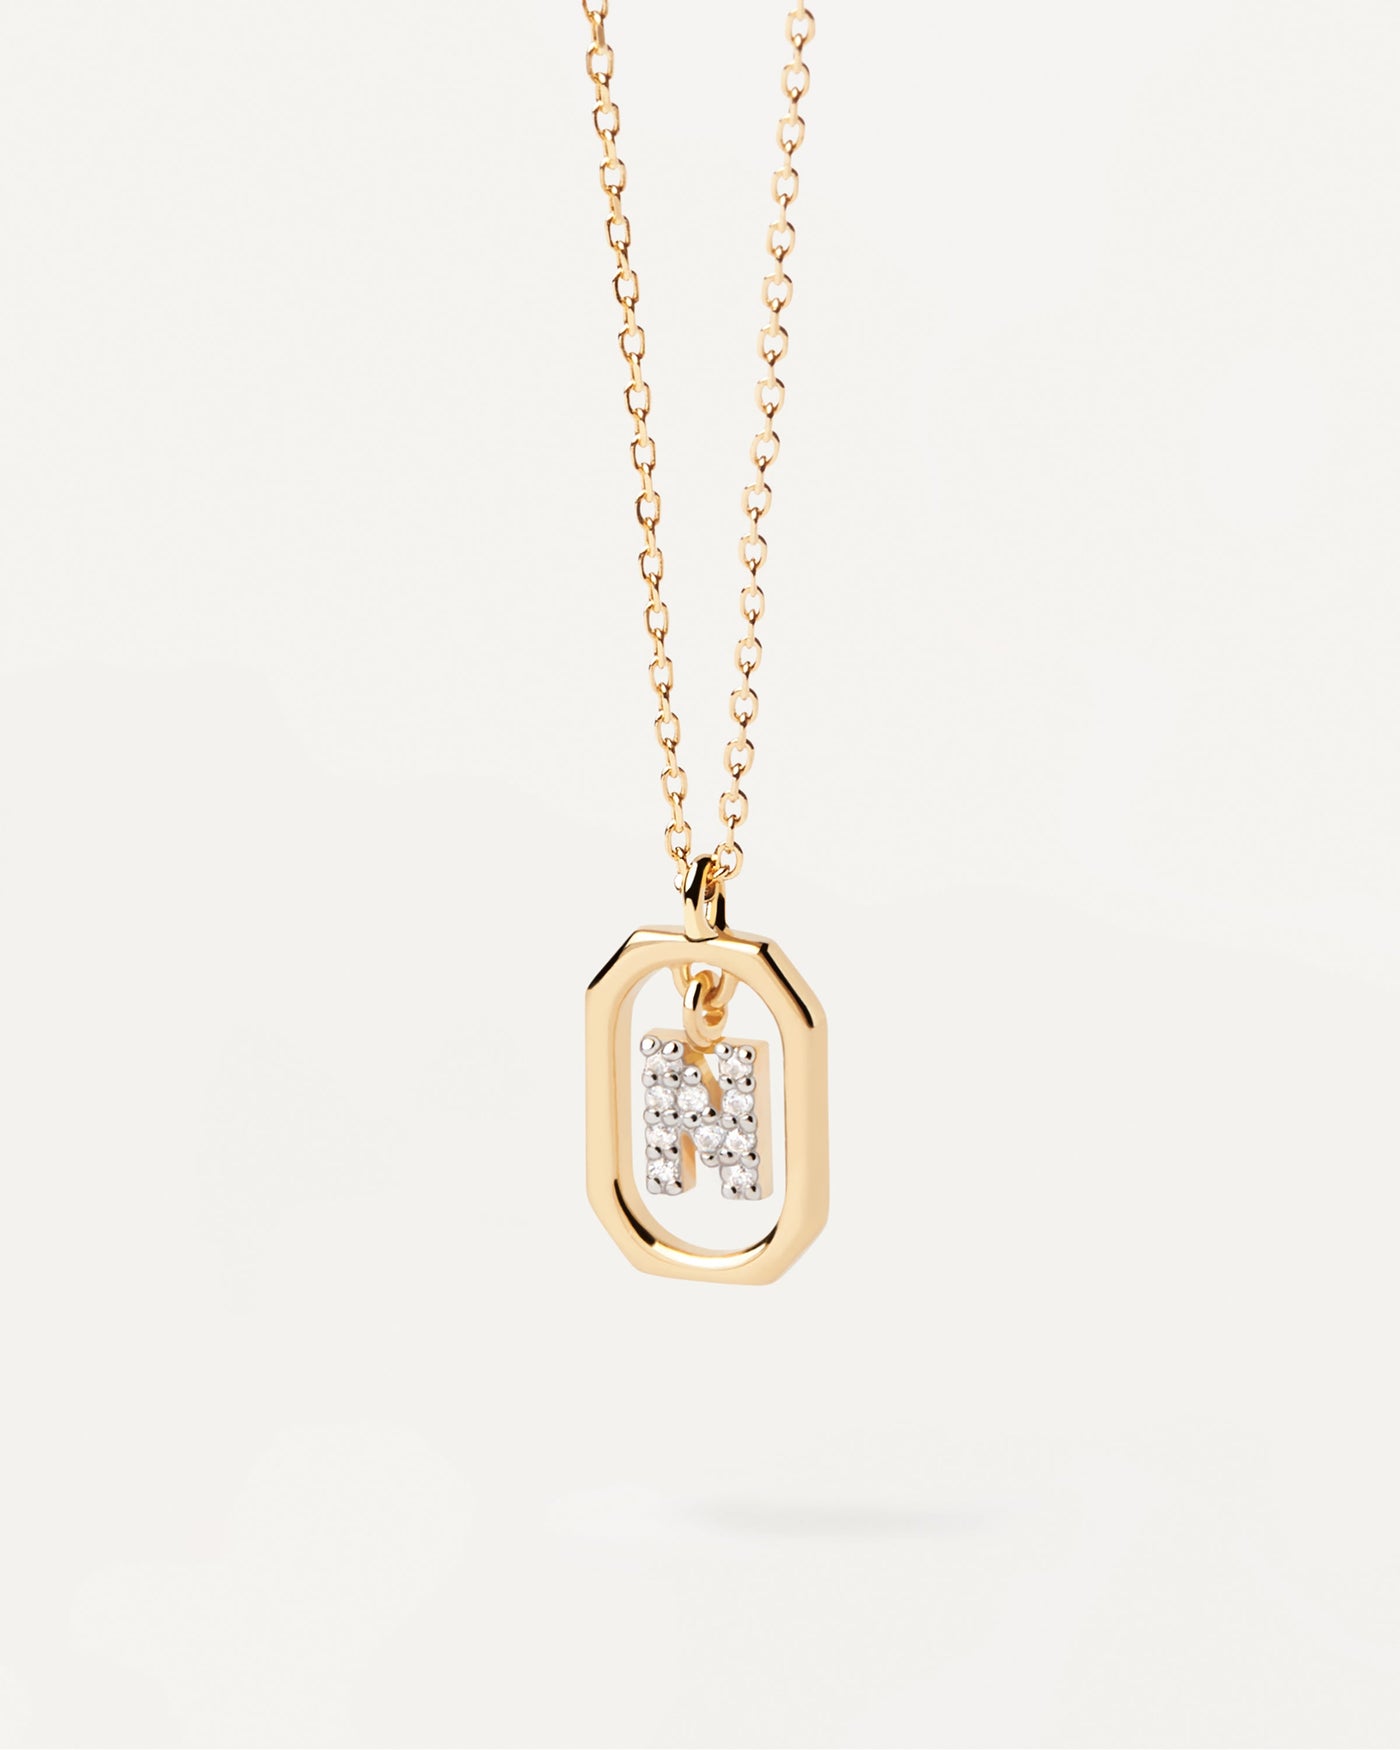 2023 Selection | Mini Letter N Necklace. Small initial N necklace in zirconia inside gold-plated silver octagonal pendant. Get the latest arrival from PDPAOLA. Place your order safely and get this Best Seller. Free Shipping.